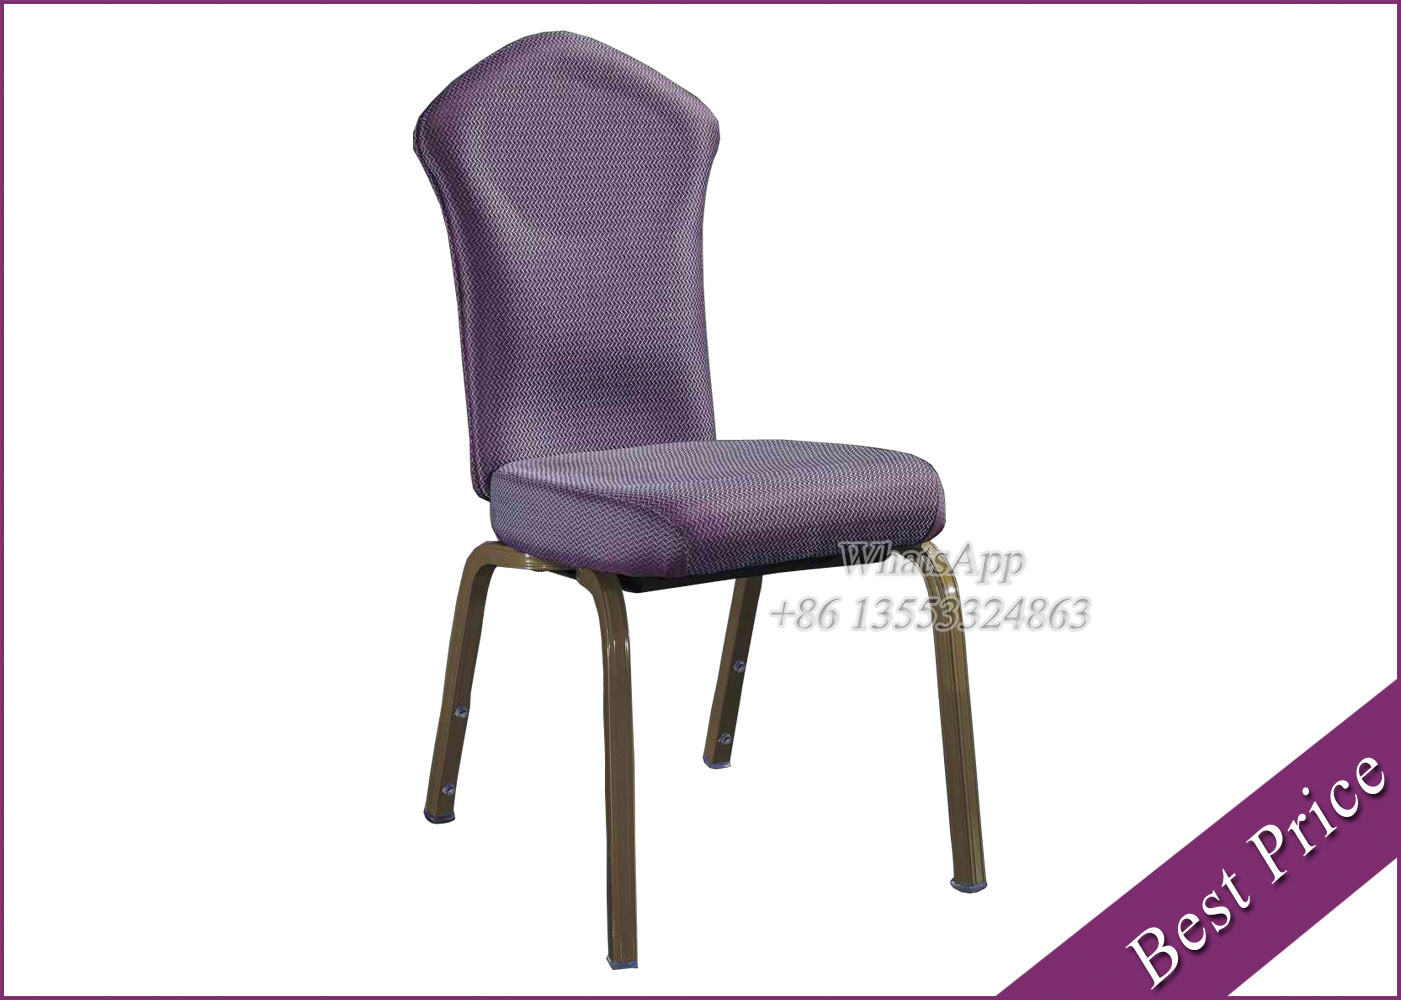 China Manufacture Good quality Stacking banquet chair all discount furniture (YF-22)